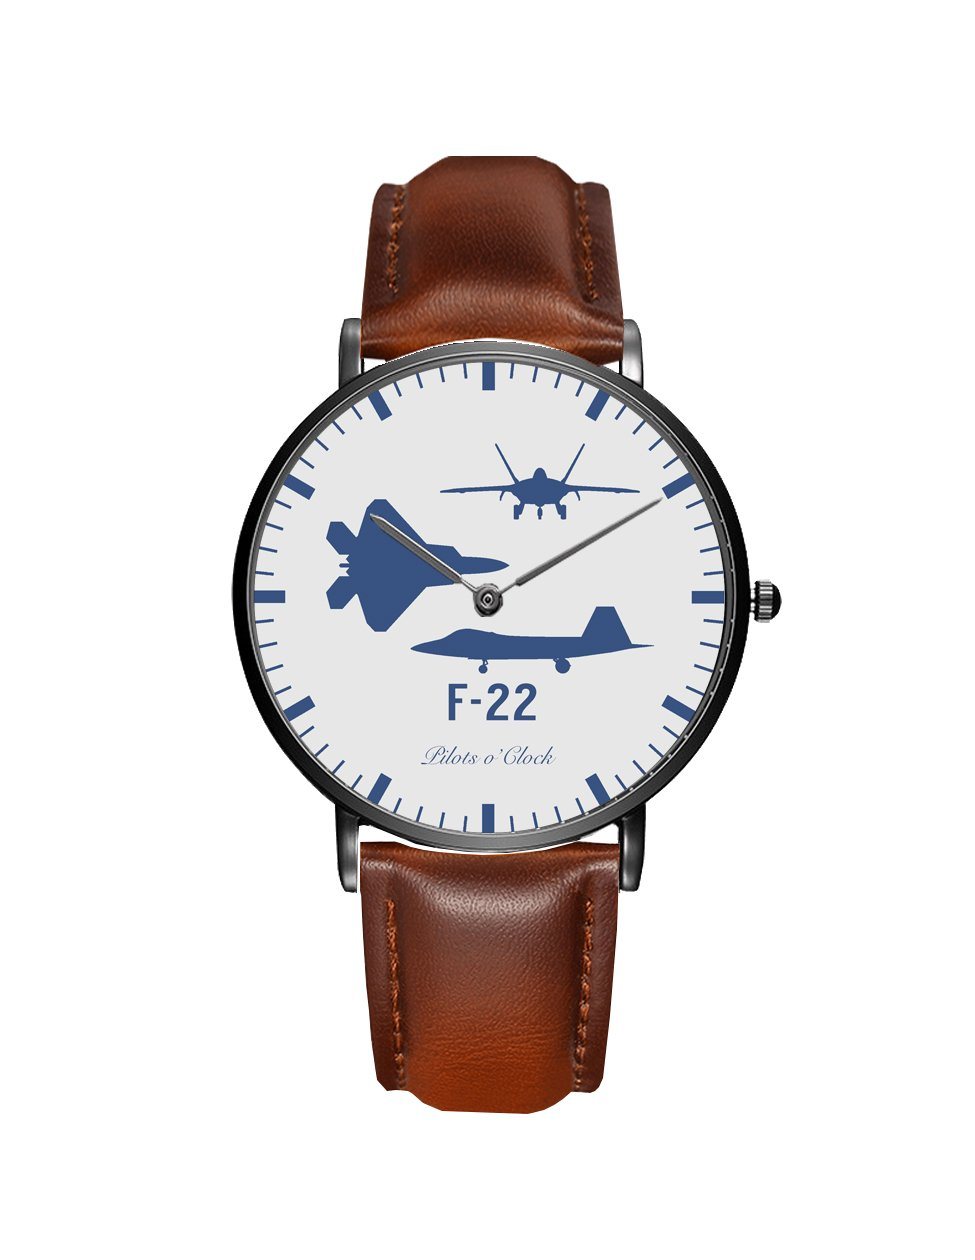 F22 Raptor (Special) Leather Strap Watches Pilot Eyes Store Black & Brown Leather Strap 